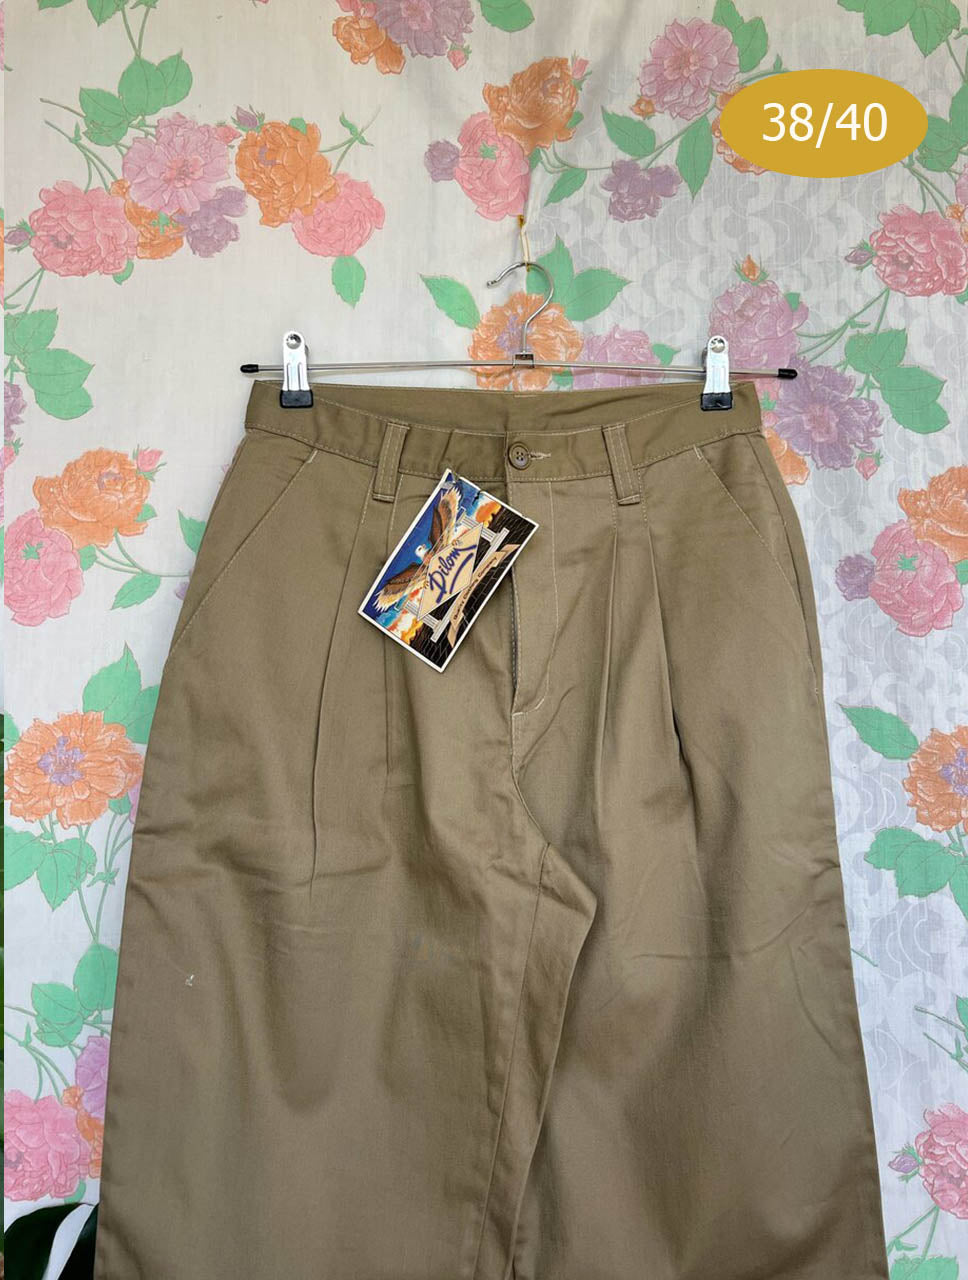 Deadstock Kaki Pants - with the tag!